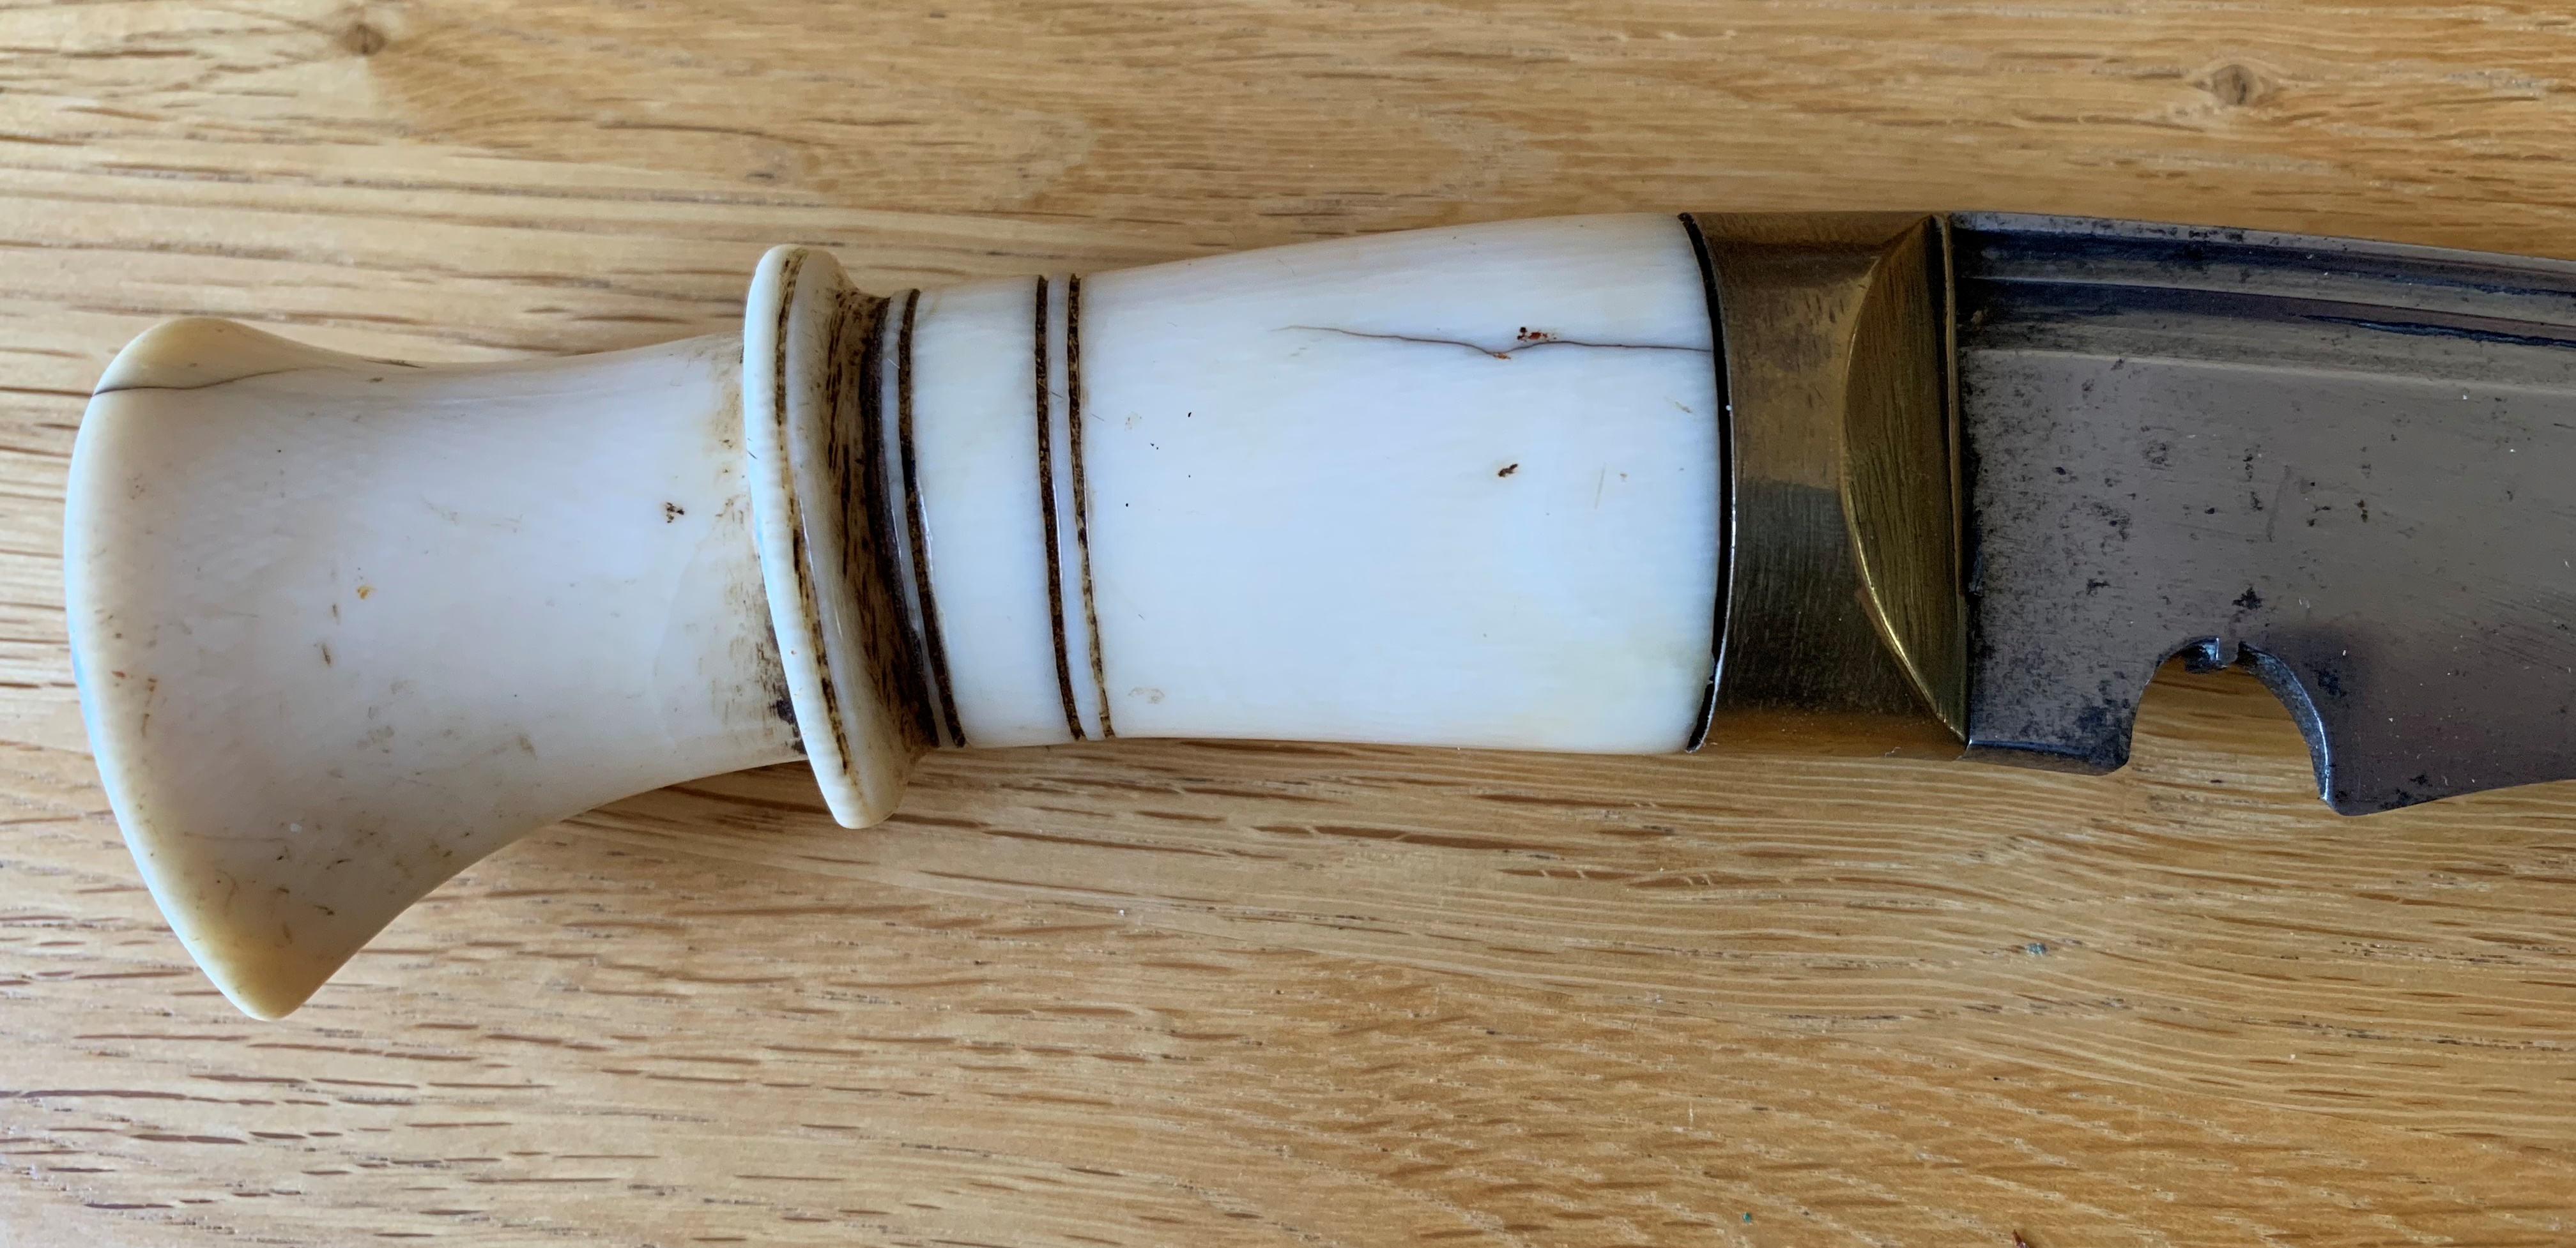 A superb Ivory handled kukri, probably WW1 era, the scabbard inner is original, but the outer is a - Image 3 of 6